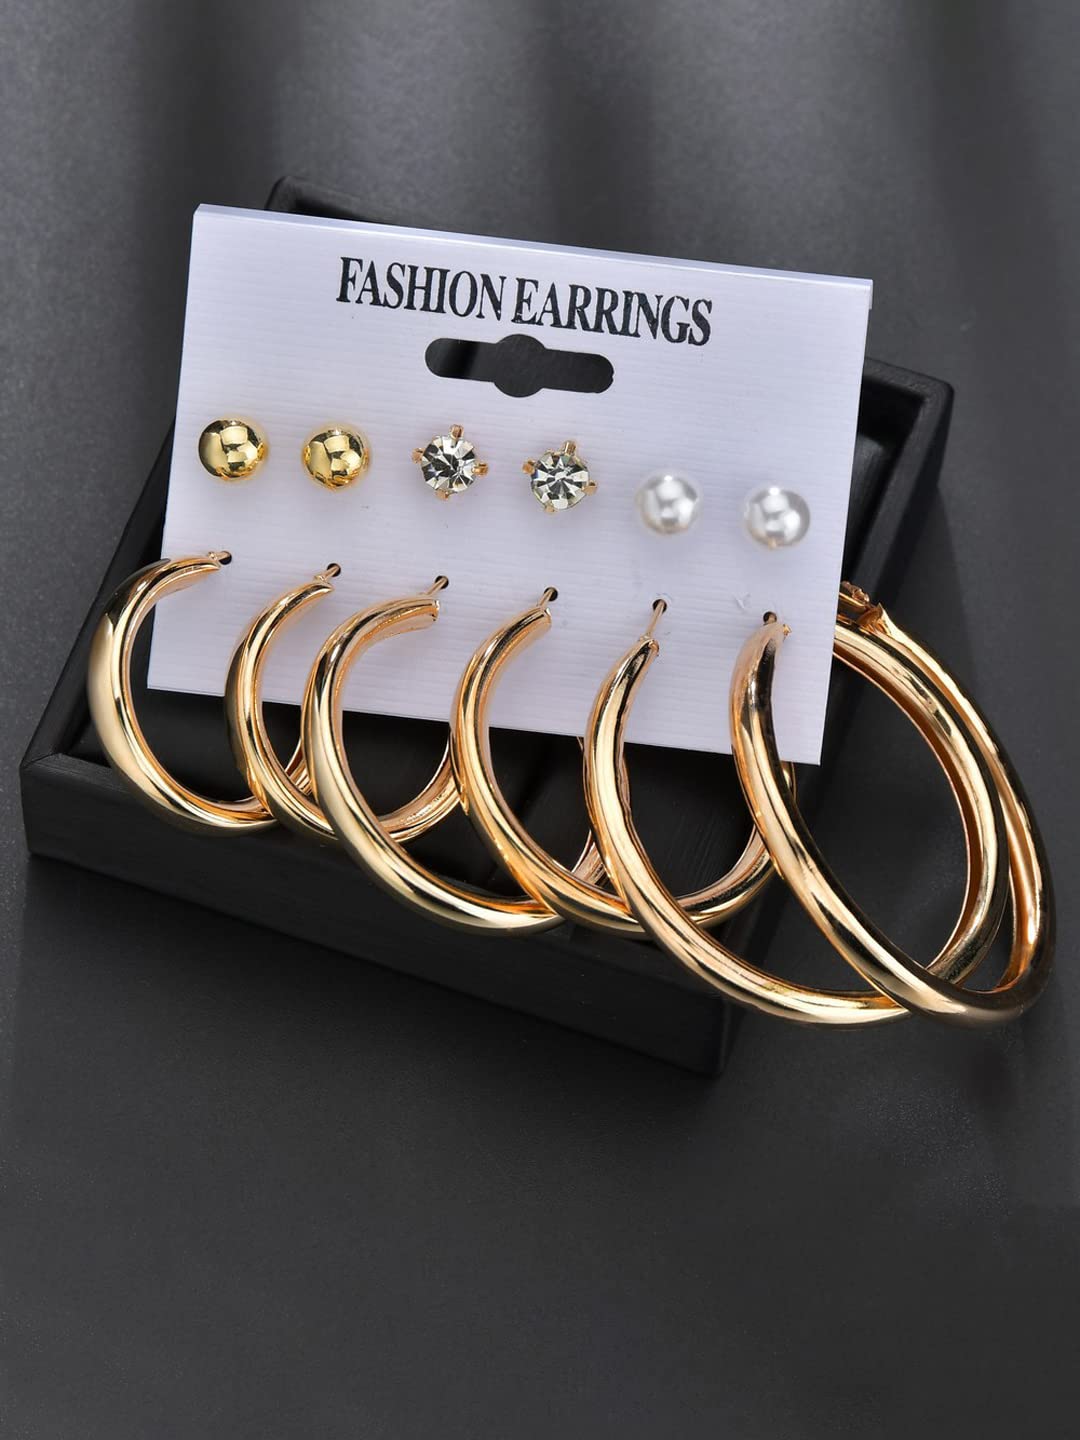 Yellow Chimes Hoop Earrings for Women Combo of 6 Pairs Stud Earrings Crystal Pearl Gold Plated Stud Hoop Earrings Set for Women and Girls.